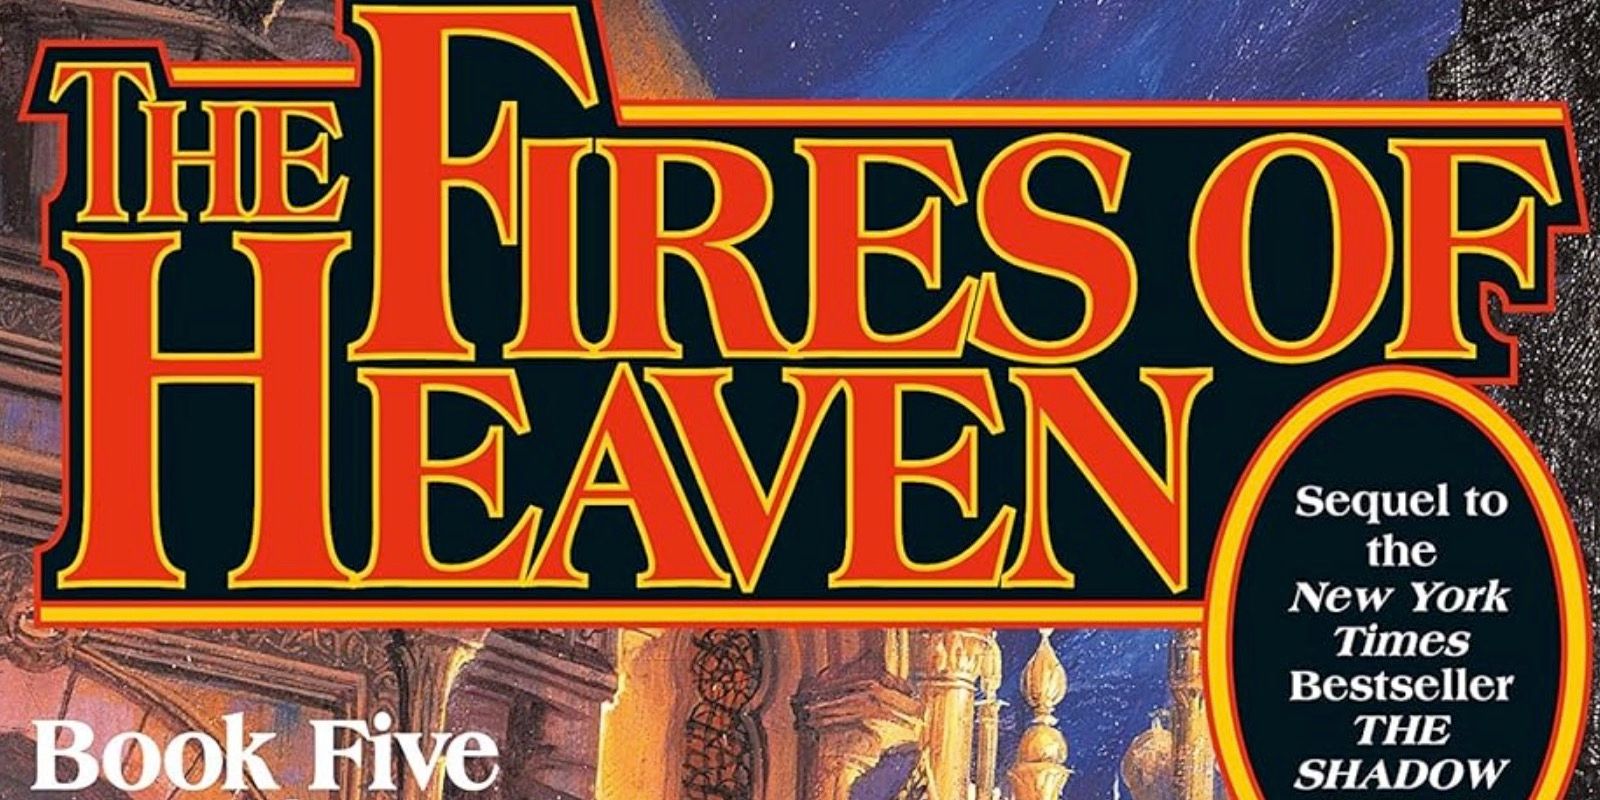 The cover of The Fires of Heaven by Robert Jordan.